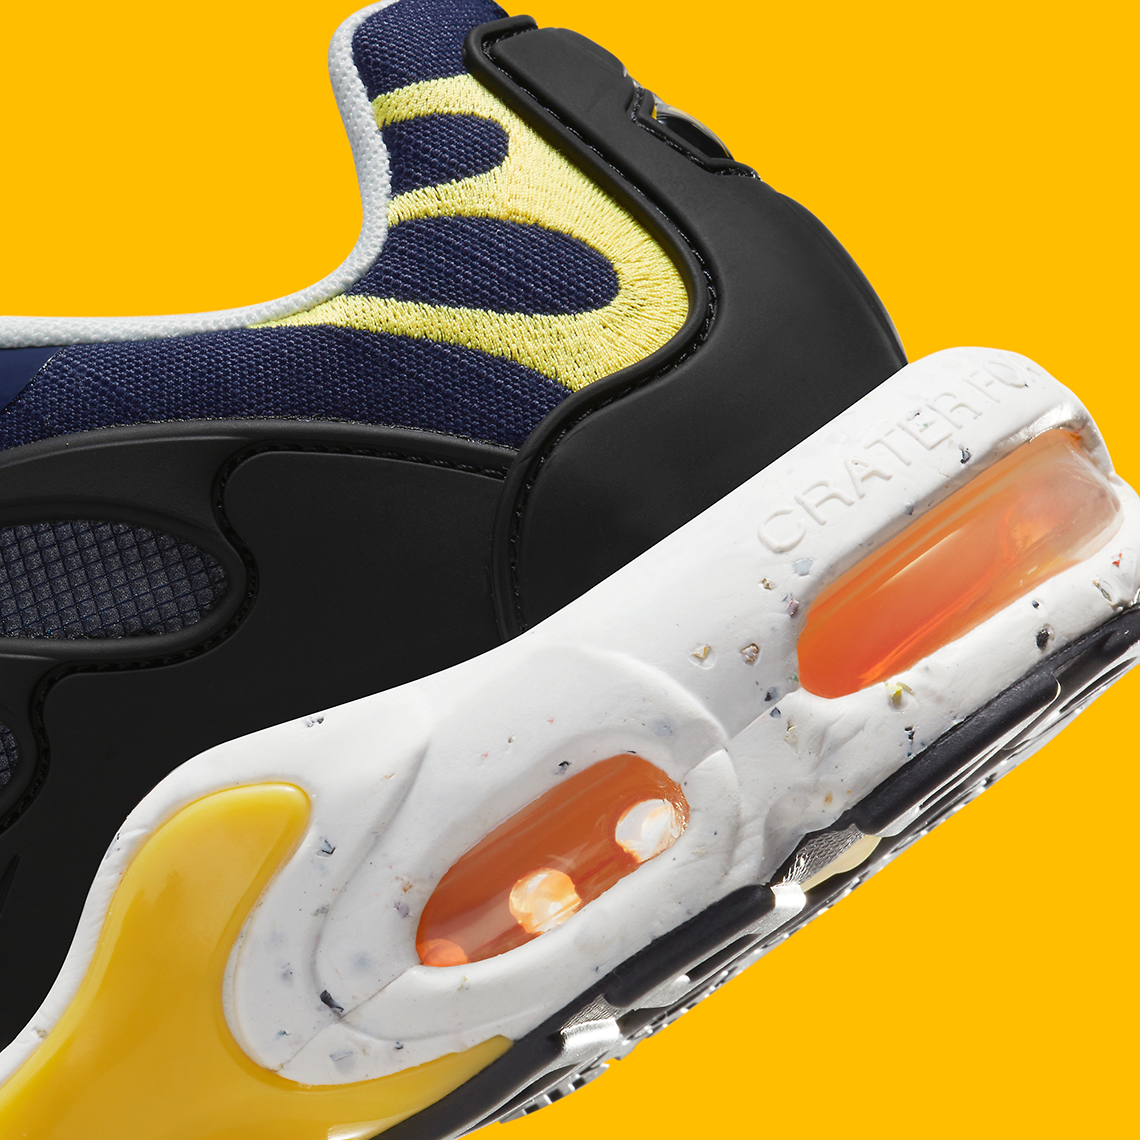 nike Air Max background terrascape plus midnight navy citron pulse DV7513 400 8